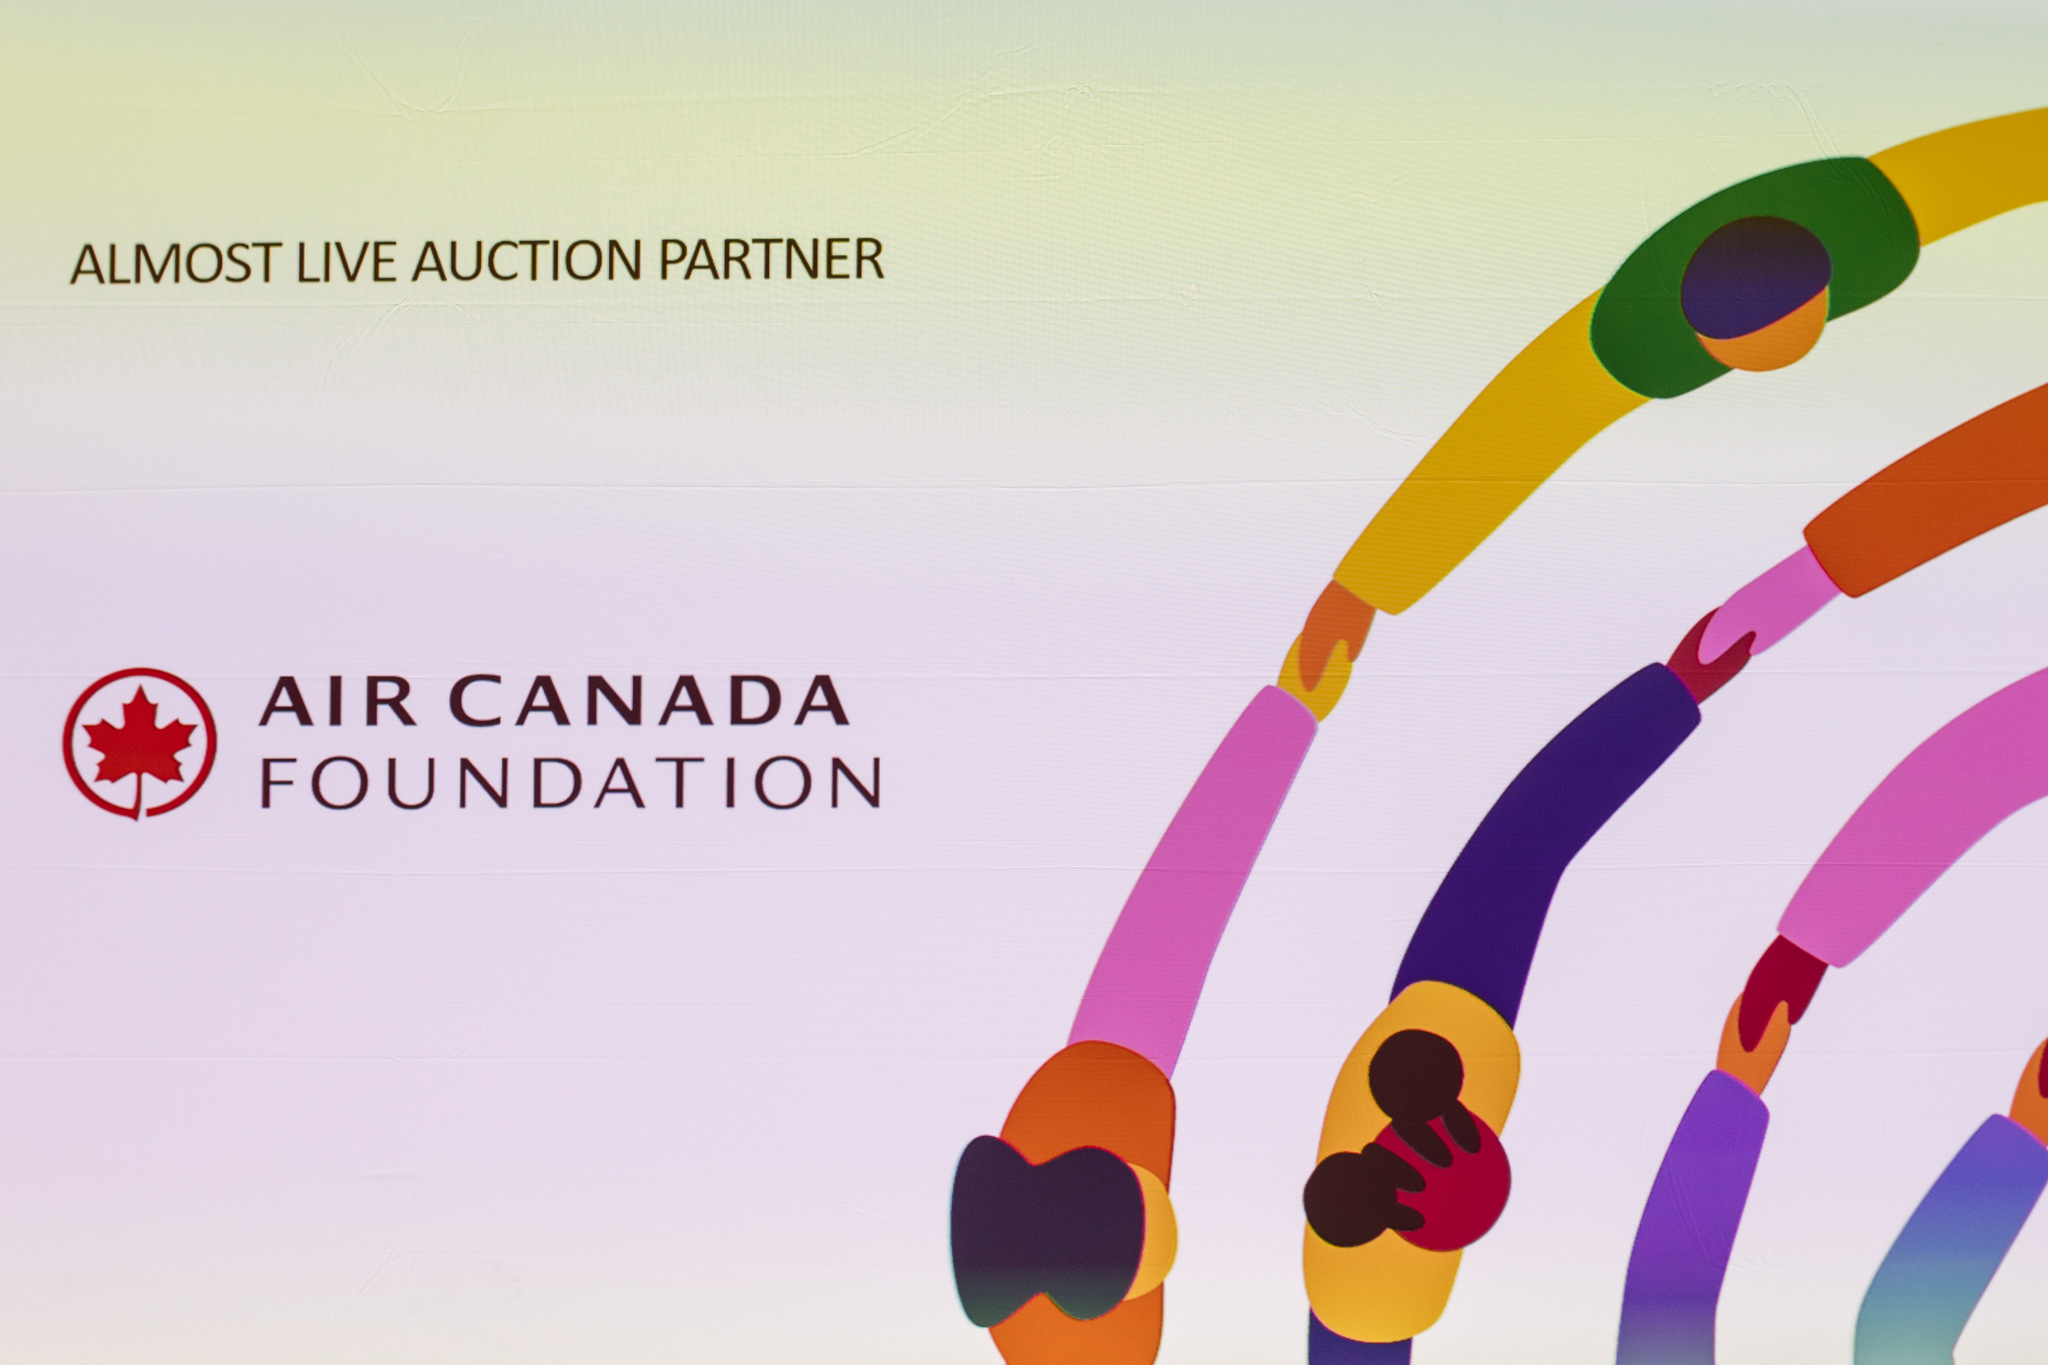 Auction partner for Air Canada Foundation.